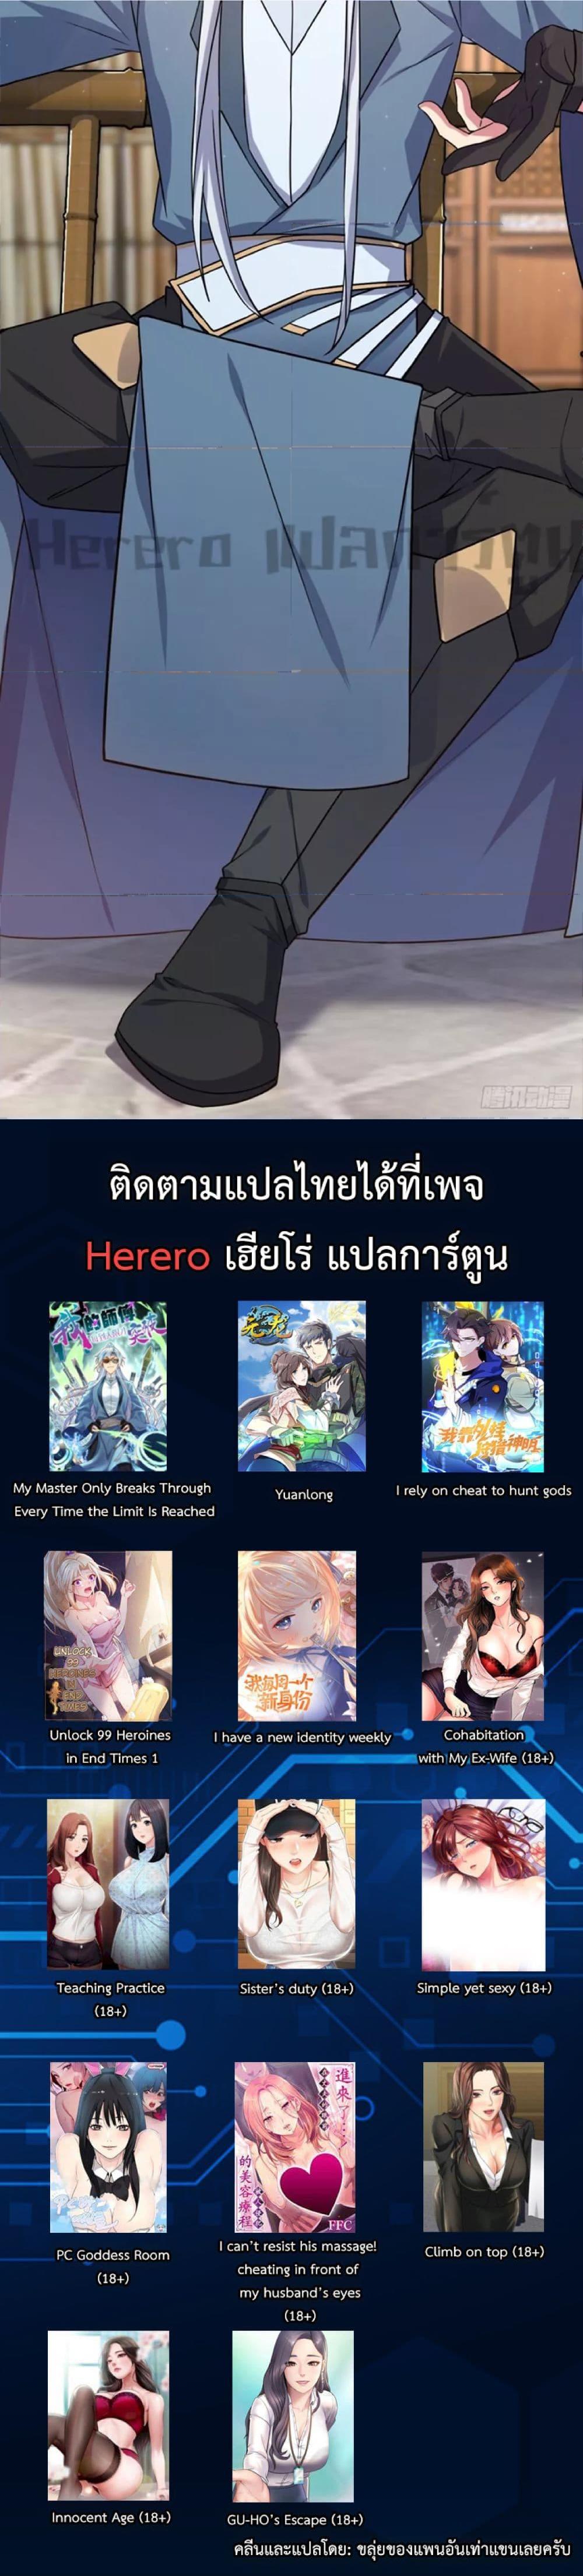 My Master Only Breaks Through Every Time the Limit Is Reached ตอนที่ 4 (19)